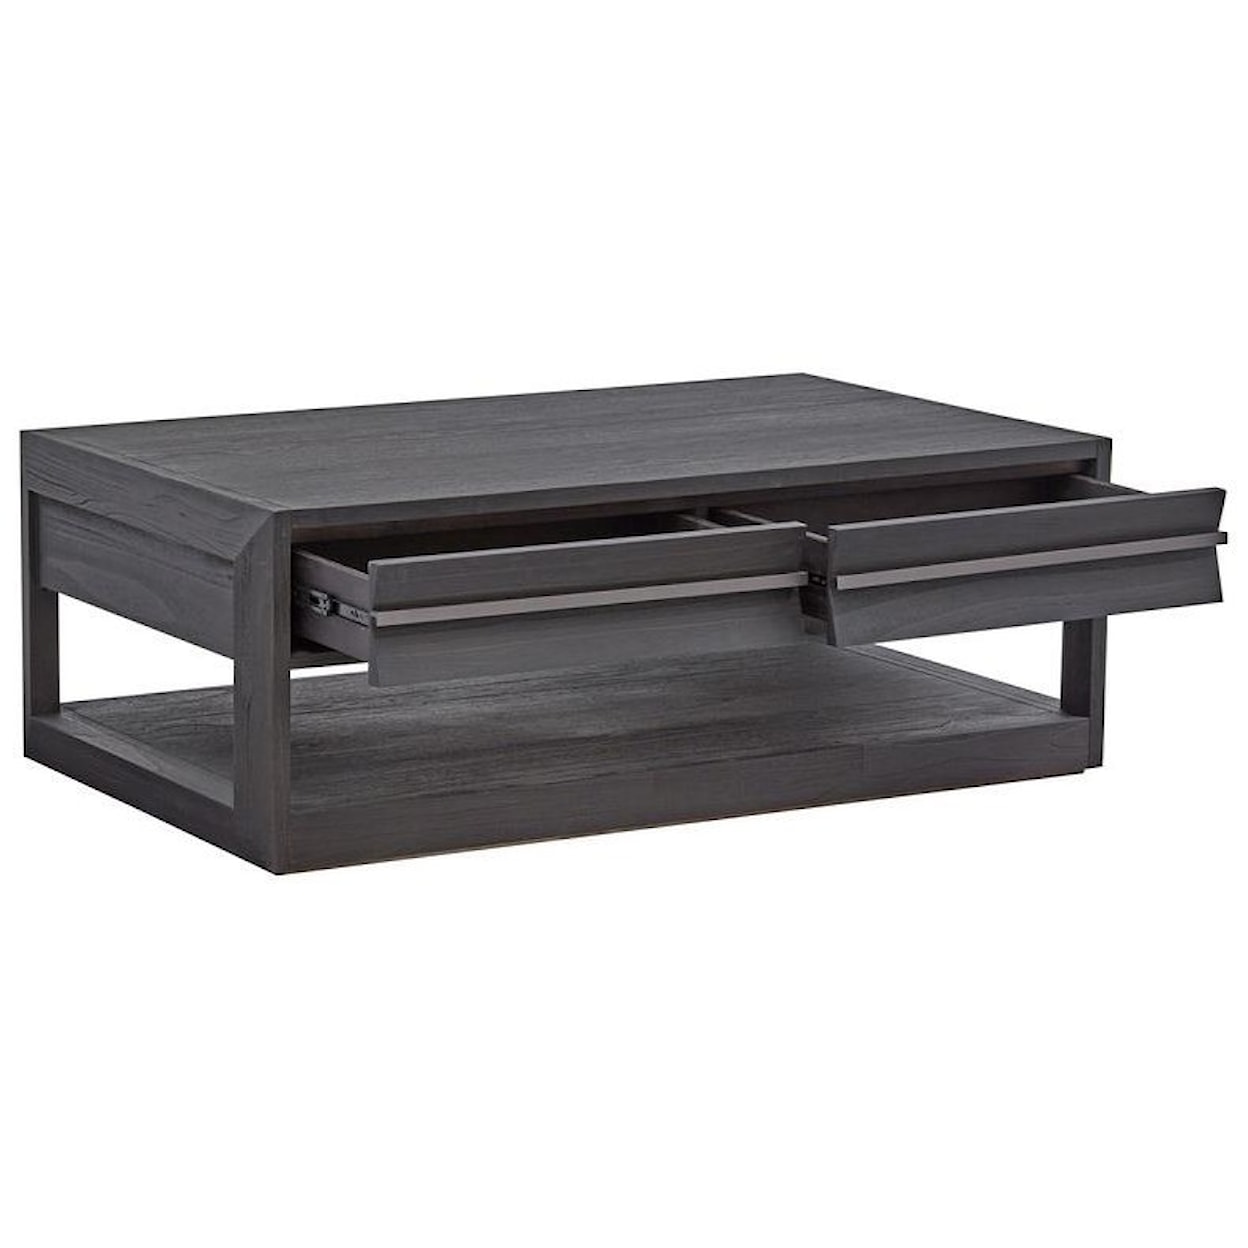 Magnussen Home Wentworth Village Bedroom Rectangular Cocktail Table w/Casters